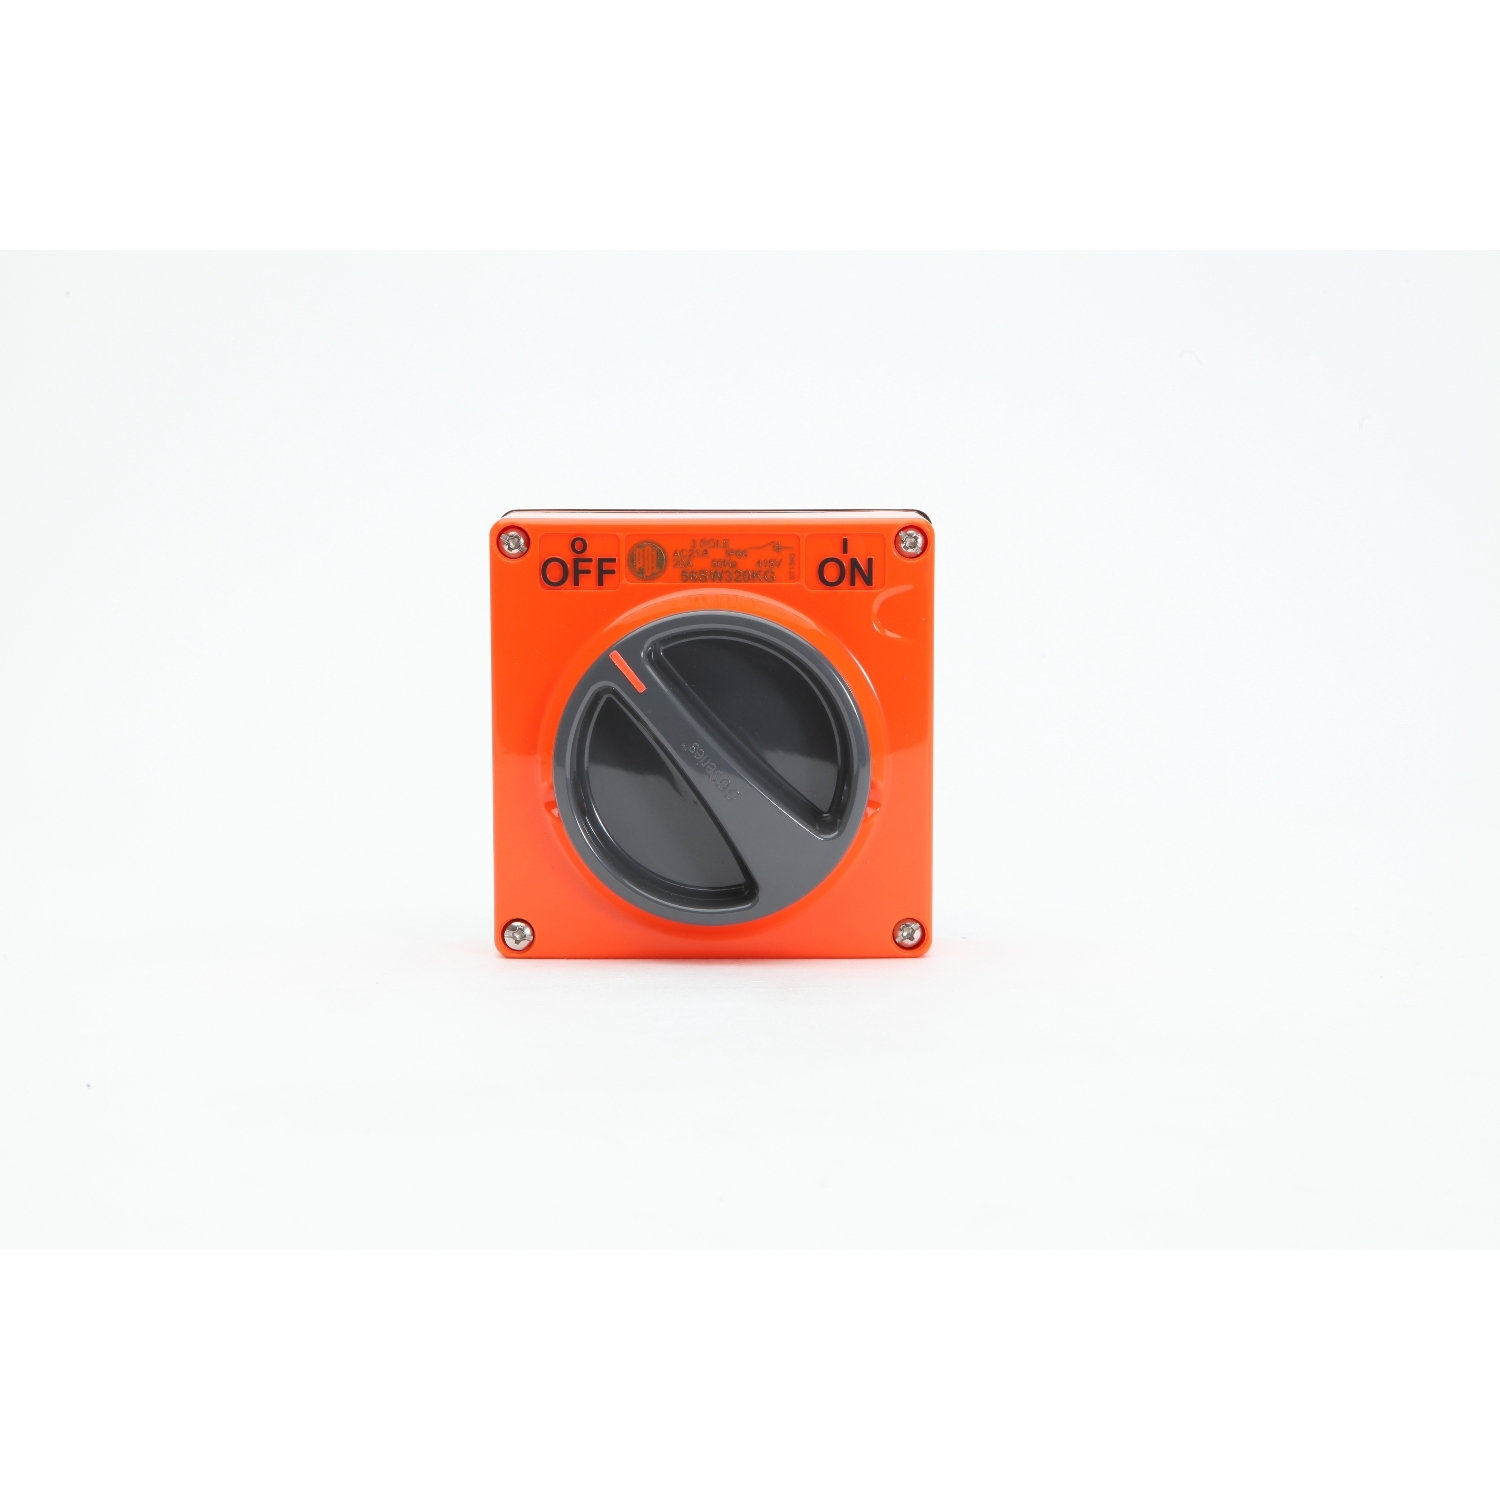 PDL 56 Series - Switch Motor Rated 20A 500V 3-Pole IP66 - Chemical-Resistant Orange